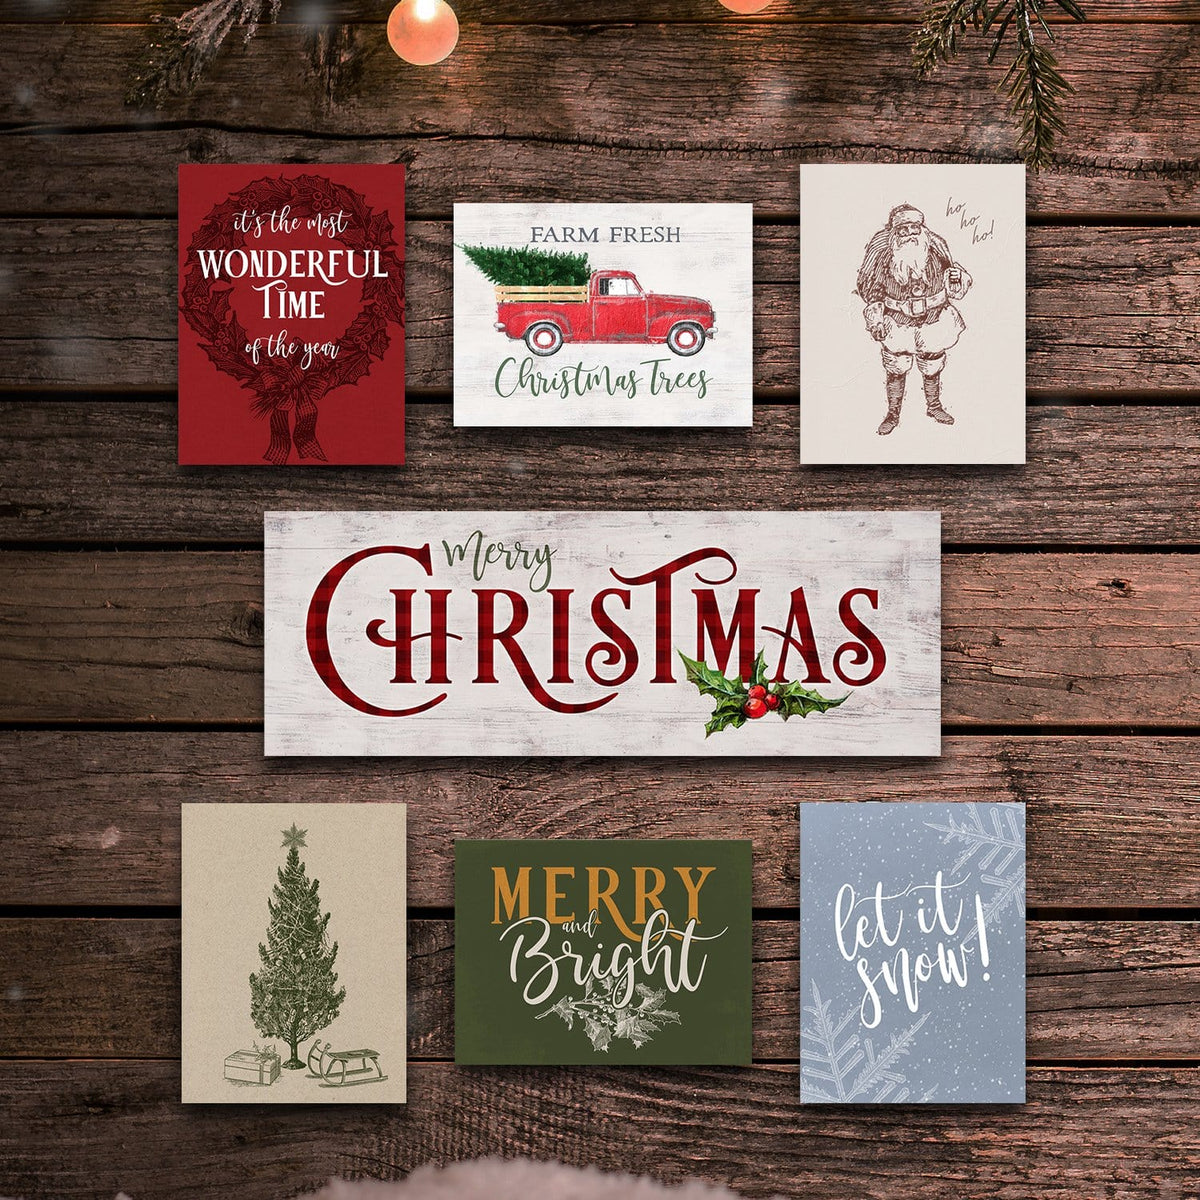 Christmas Wall display from Personal Prints